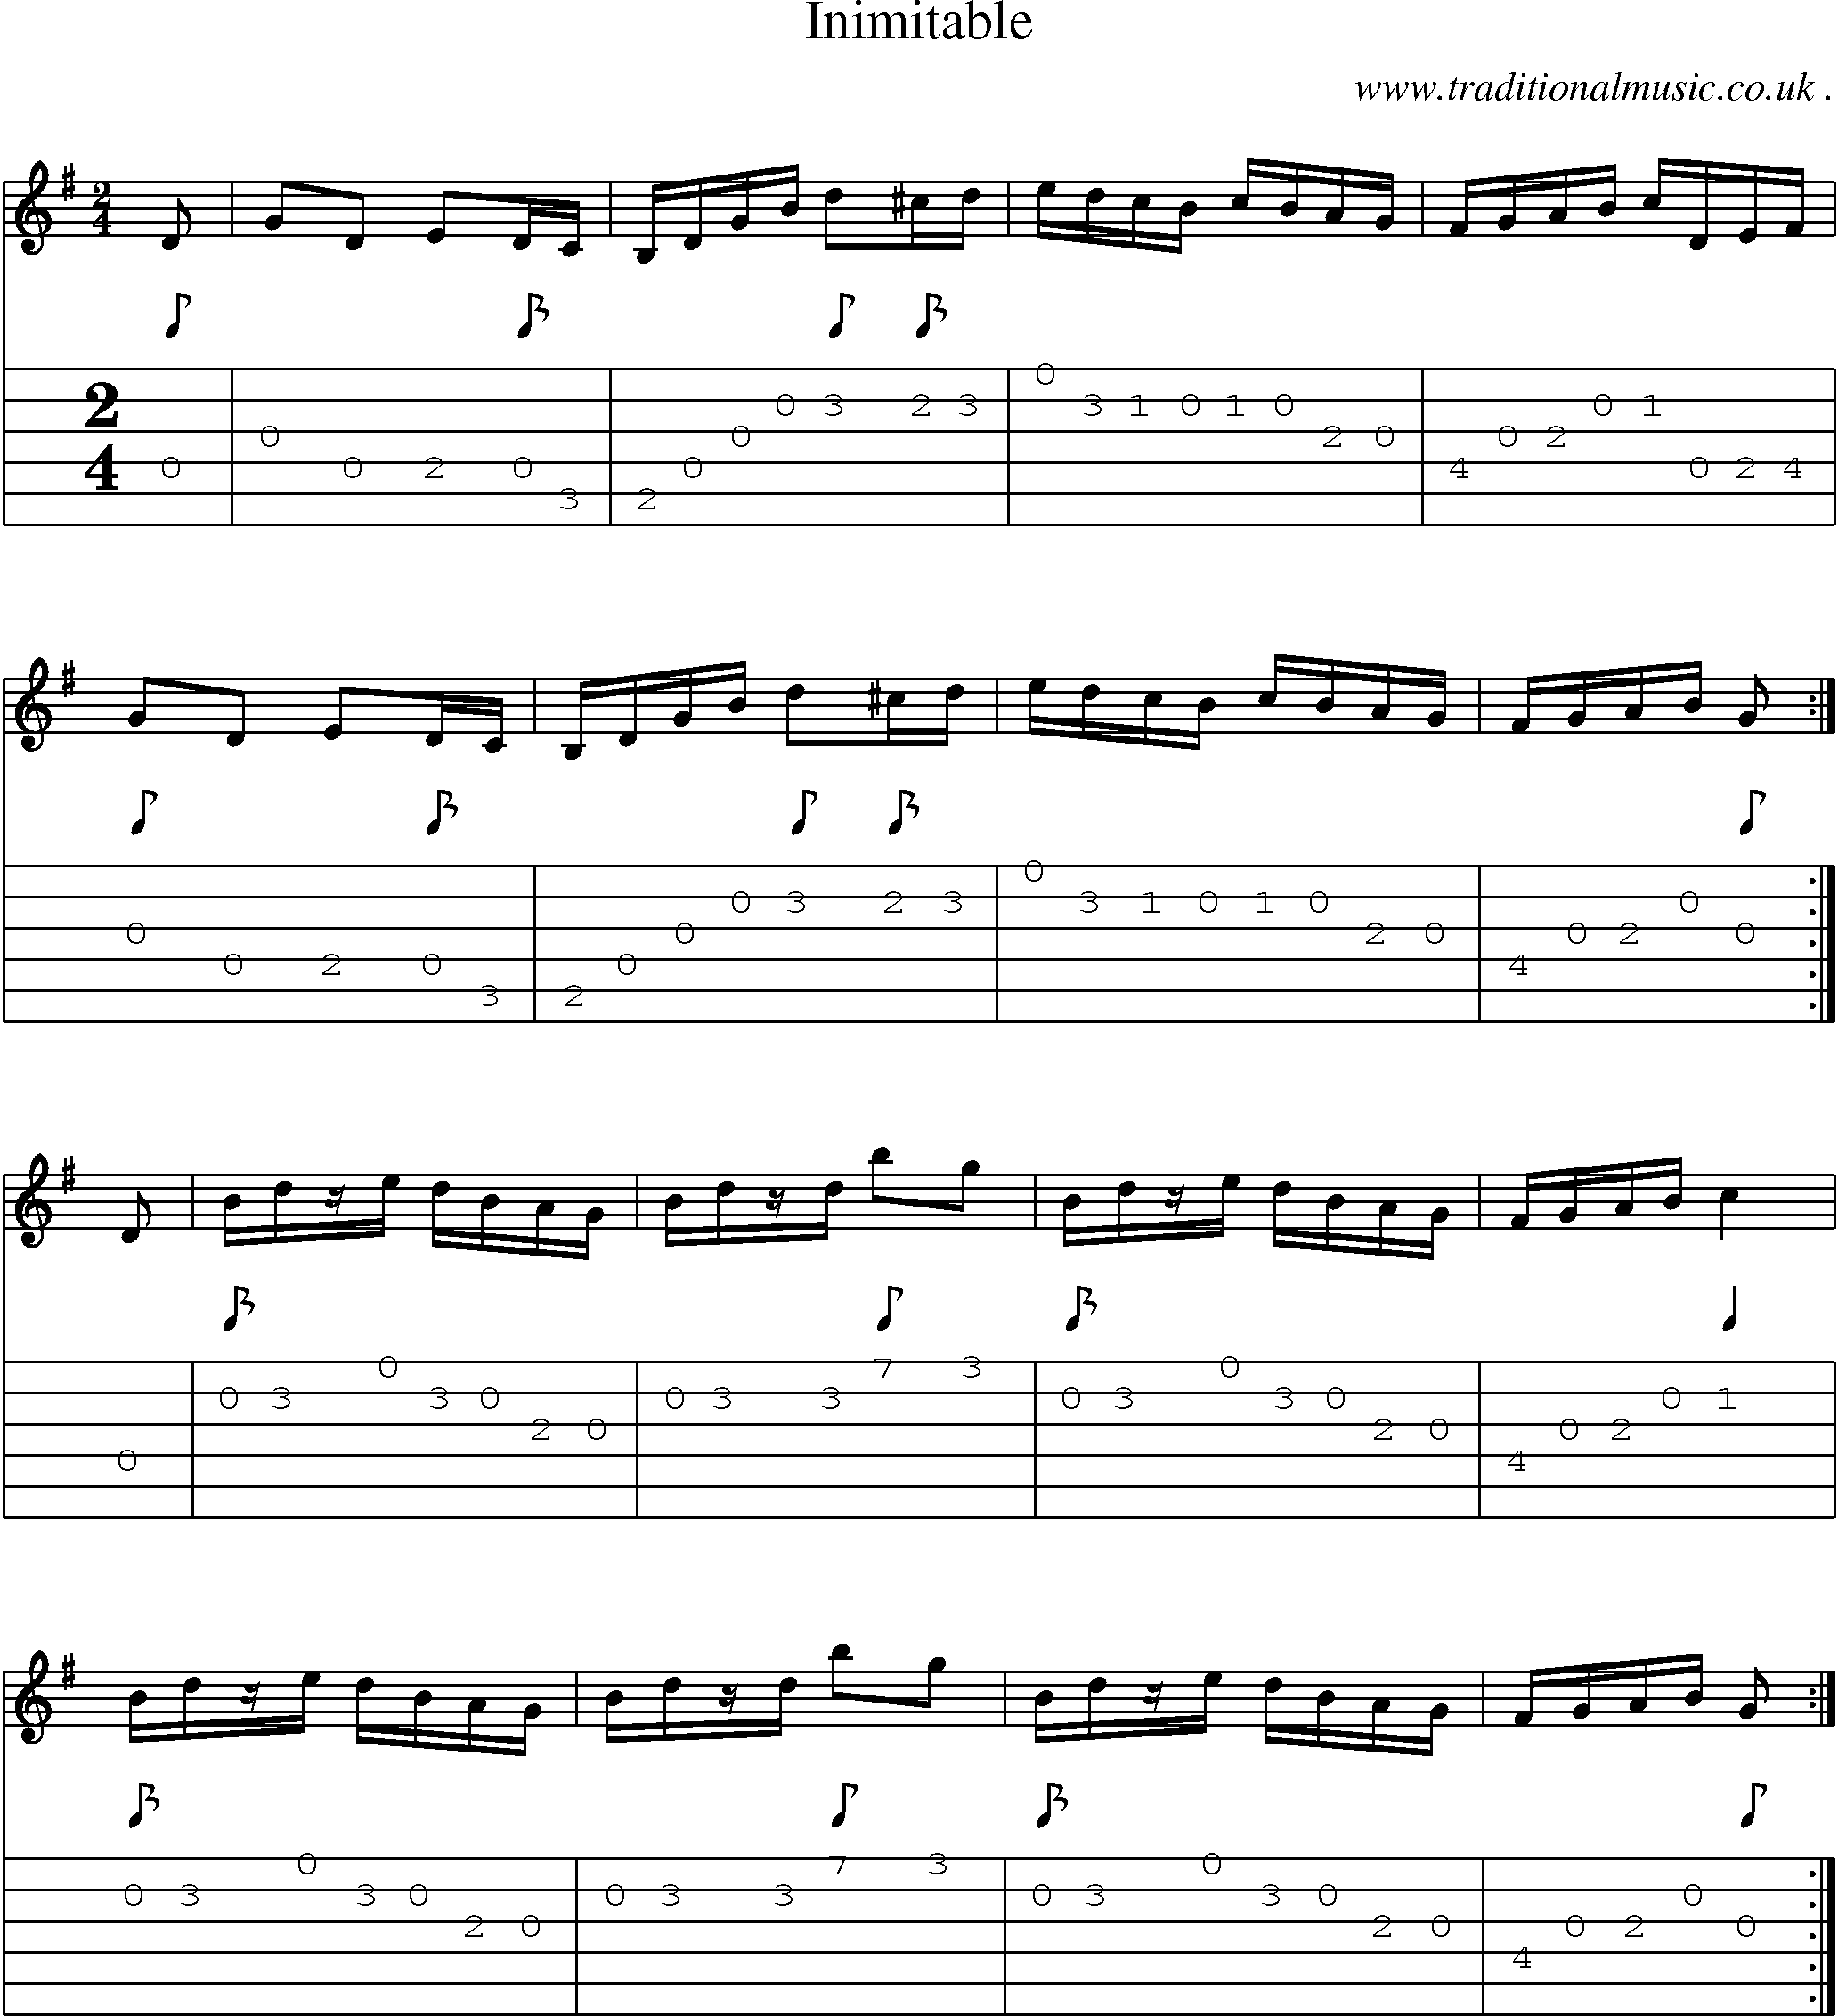 Music Score and Guitar Tabs for Inimitable